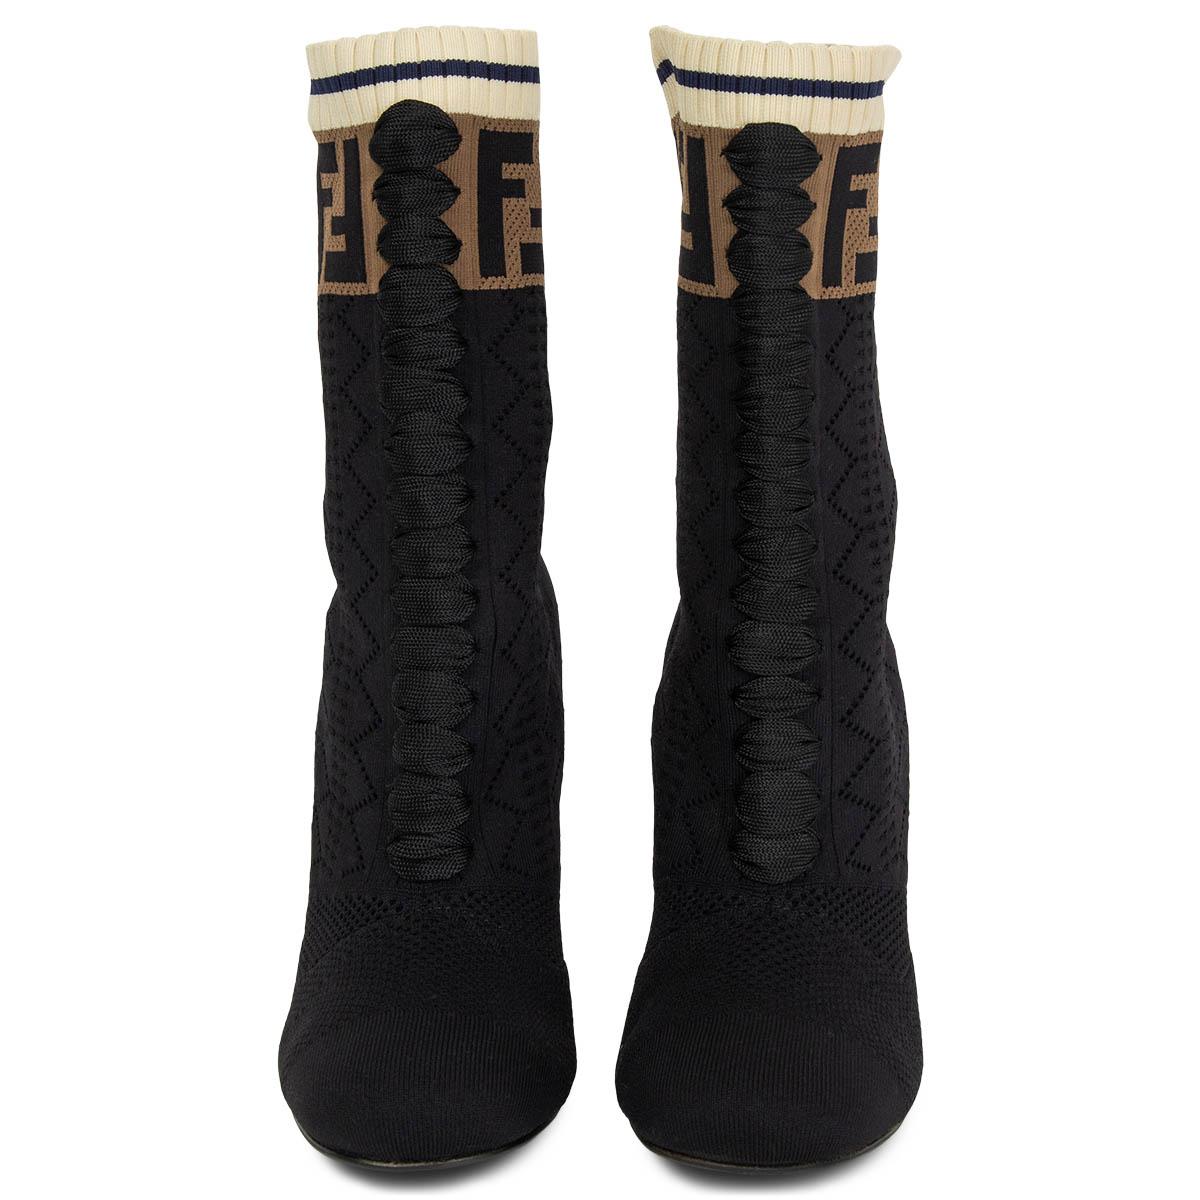 100% authentic Fendi Rockoko Knit Sock Ankle Boots in black stretchy technical fabric with brown Fendi logo knit at the top and decorative lacing detail at front. Booties feature a black and cream curved high heel. Brand new. Come with dust bag.